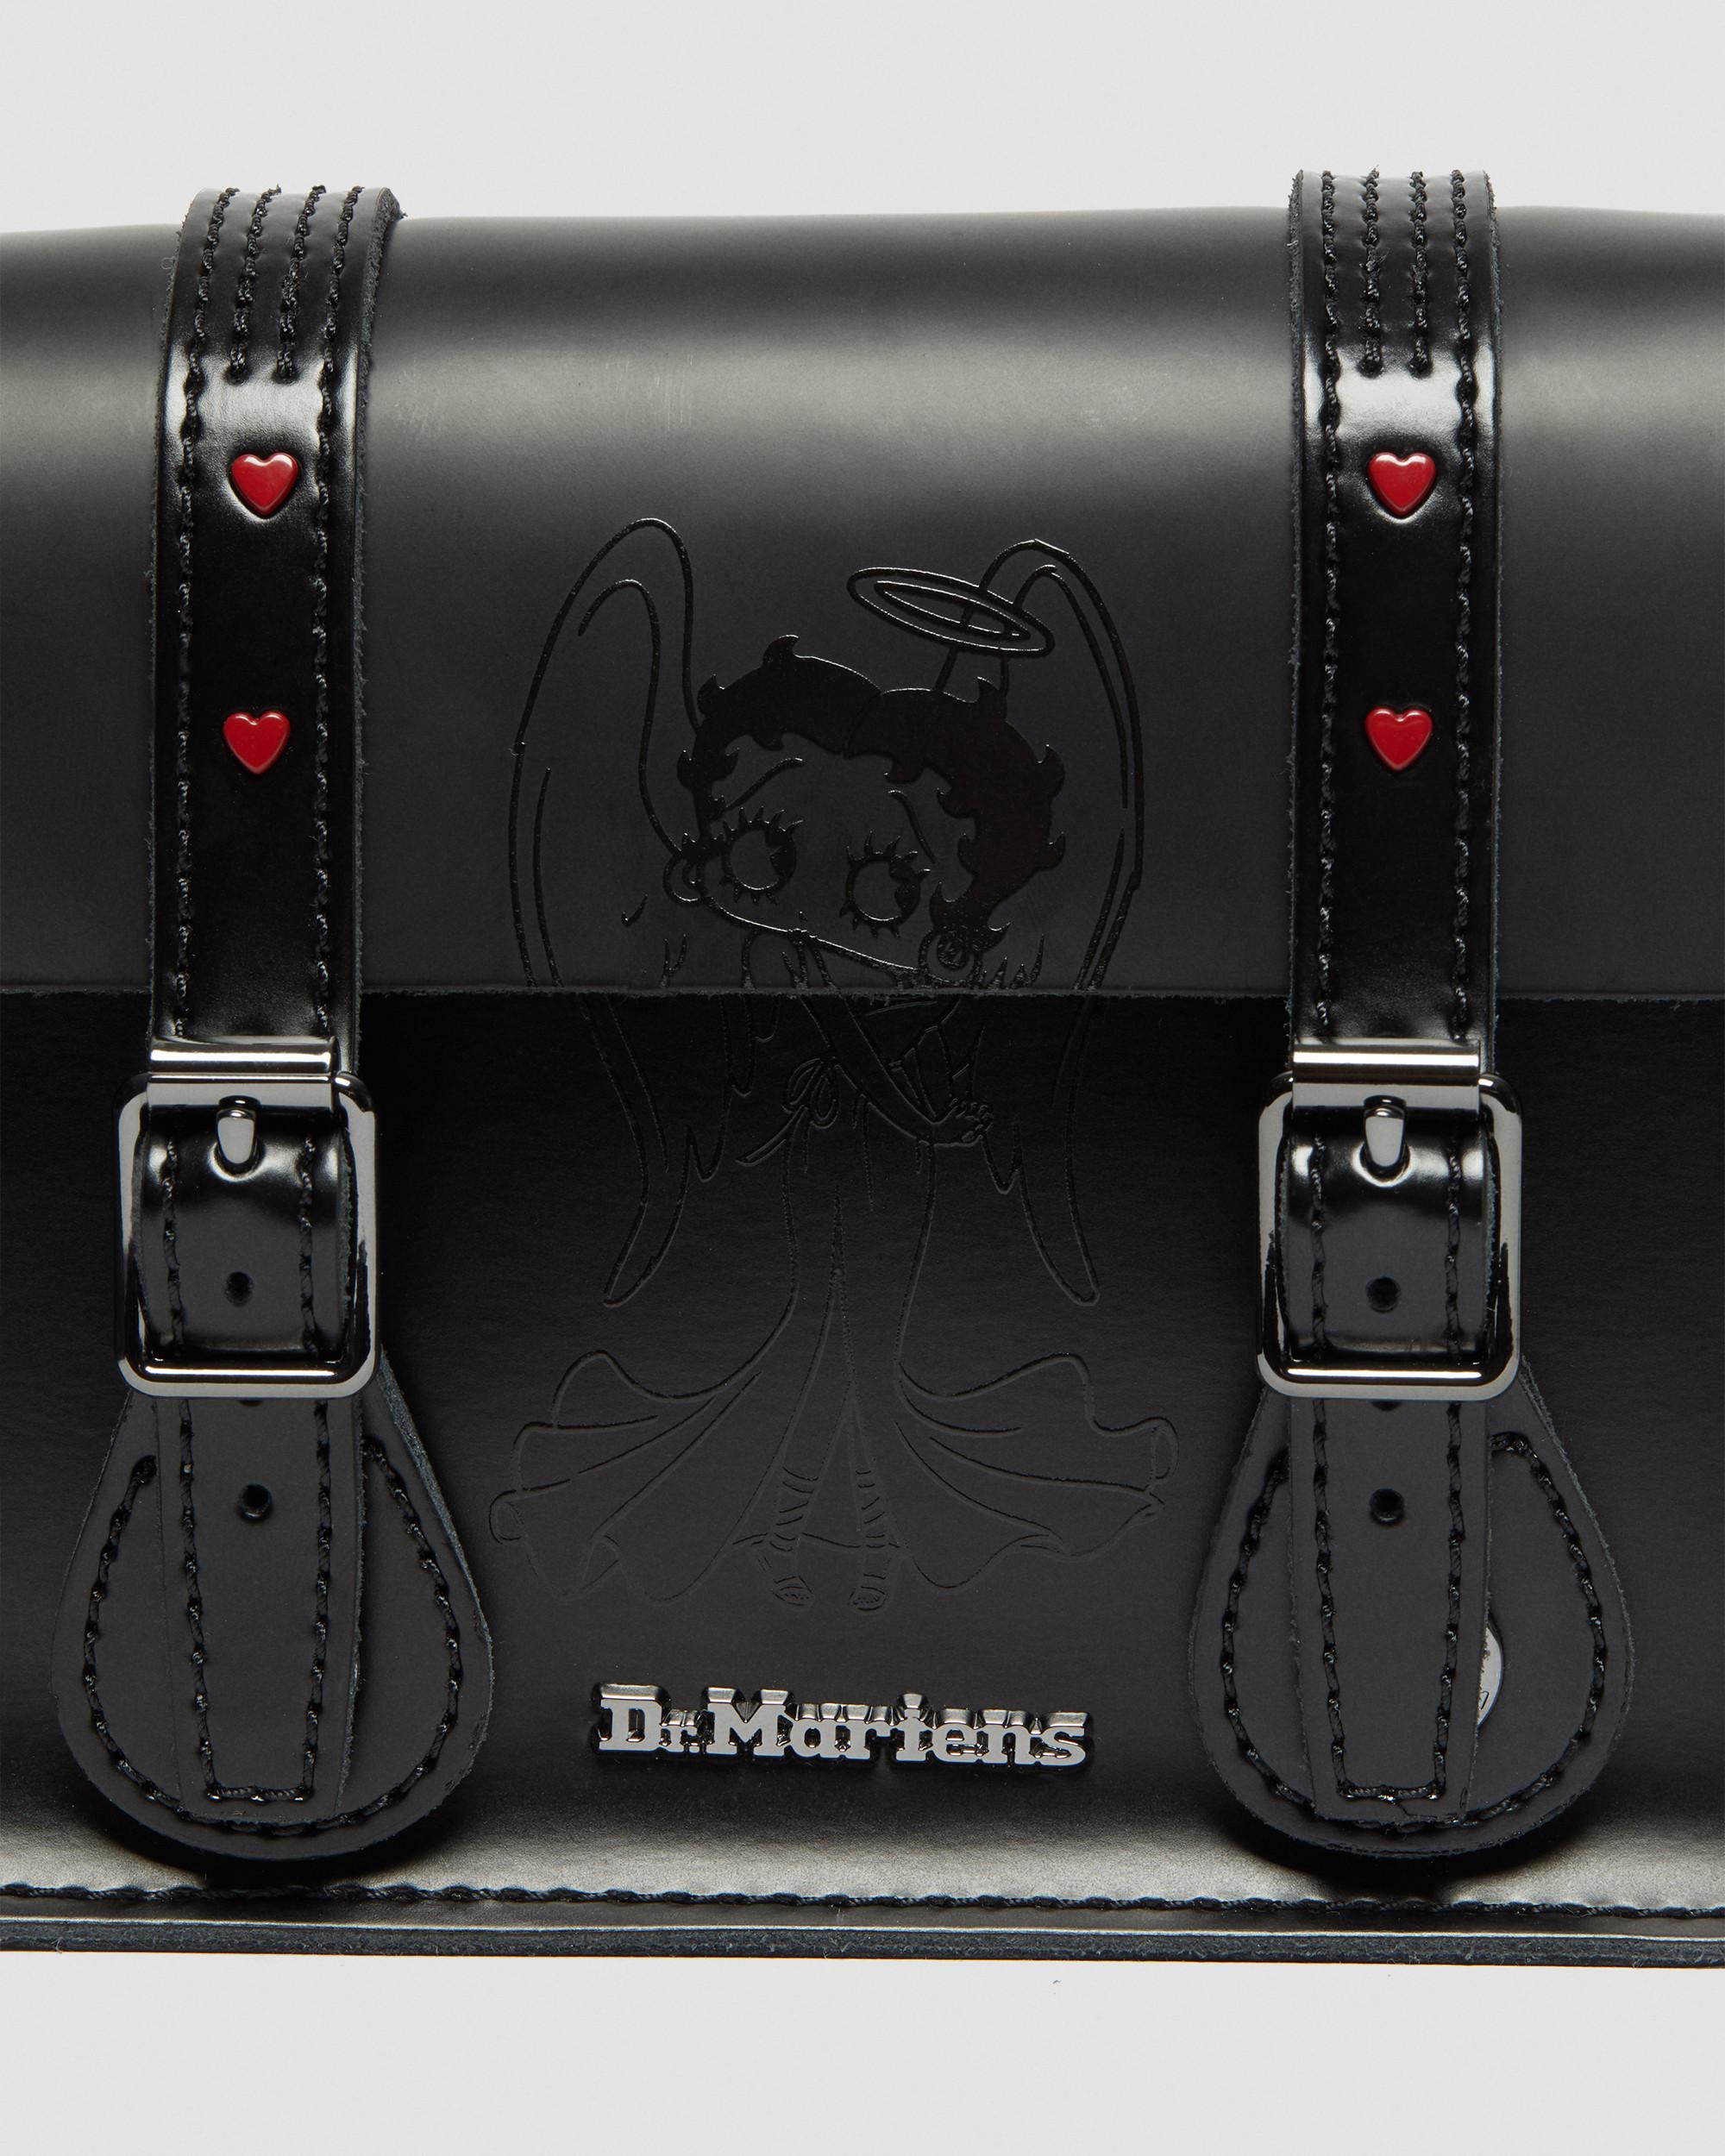 7” BETTY BOOP LEATHER SATCHEL7” BETTY BOOP LEATHER SATCHEL Dr. Martens